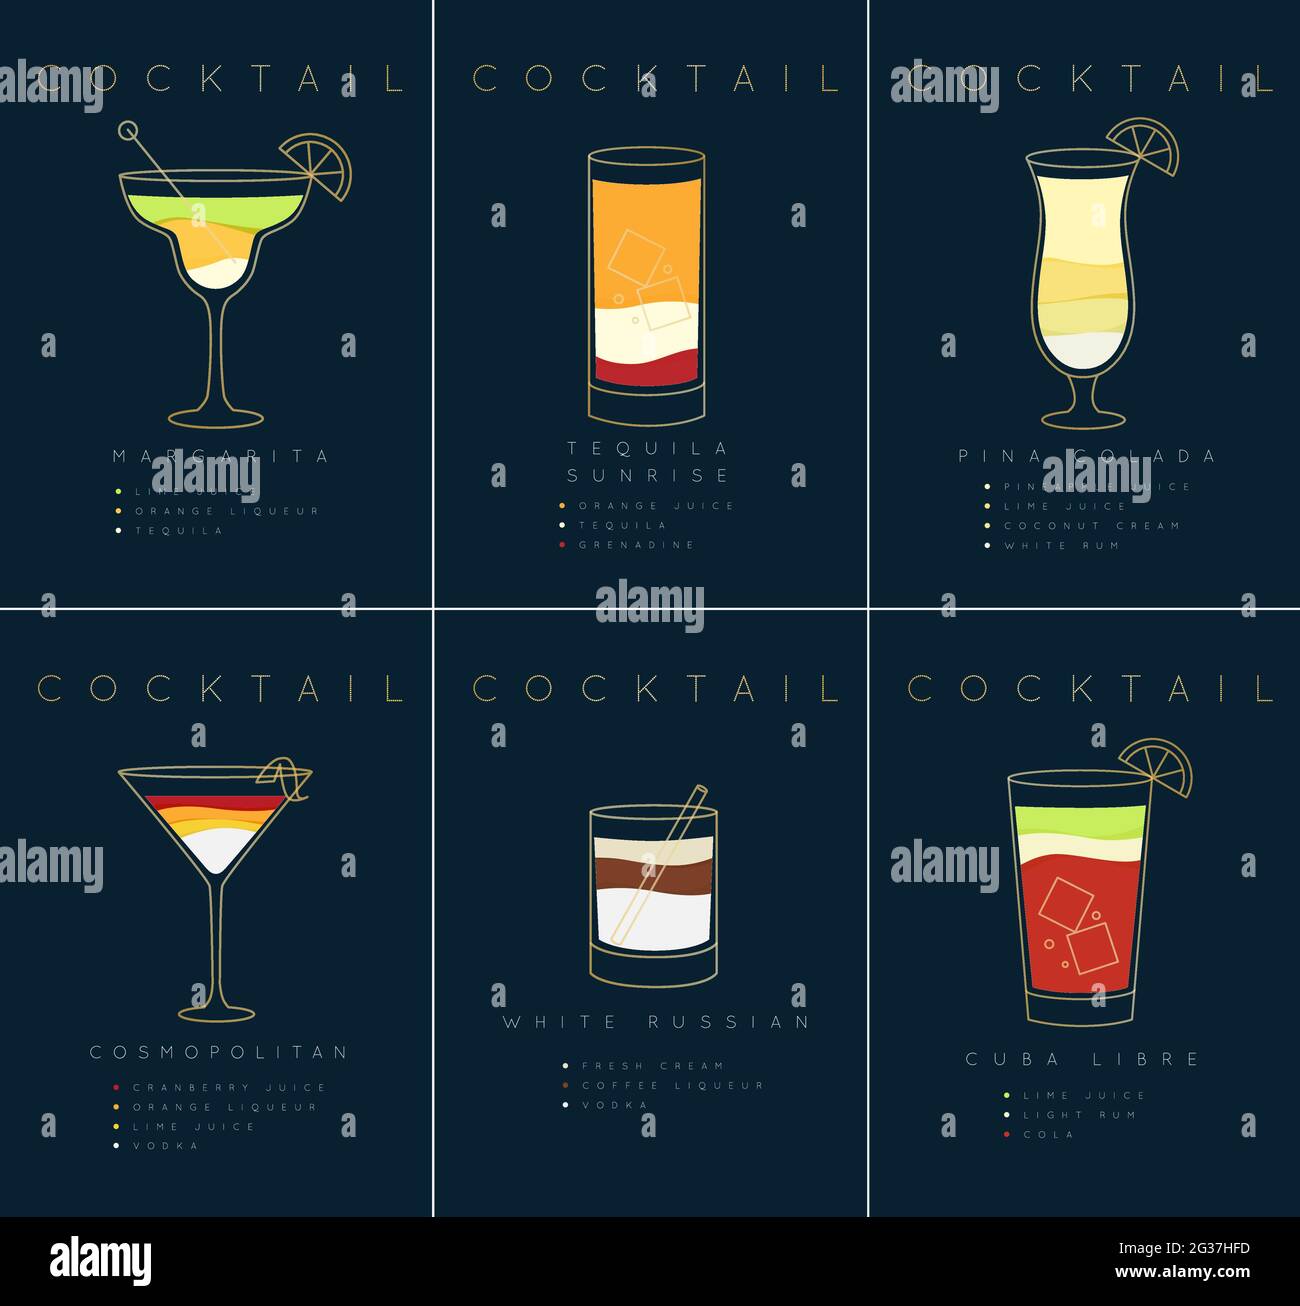 Set of flat cocktail posters margarita, tequila sunrise, pina colada, cosmopolitan, white russian, cuba libre drawing on dark blue background Stock Vector